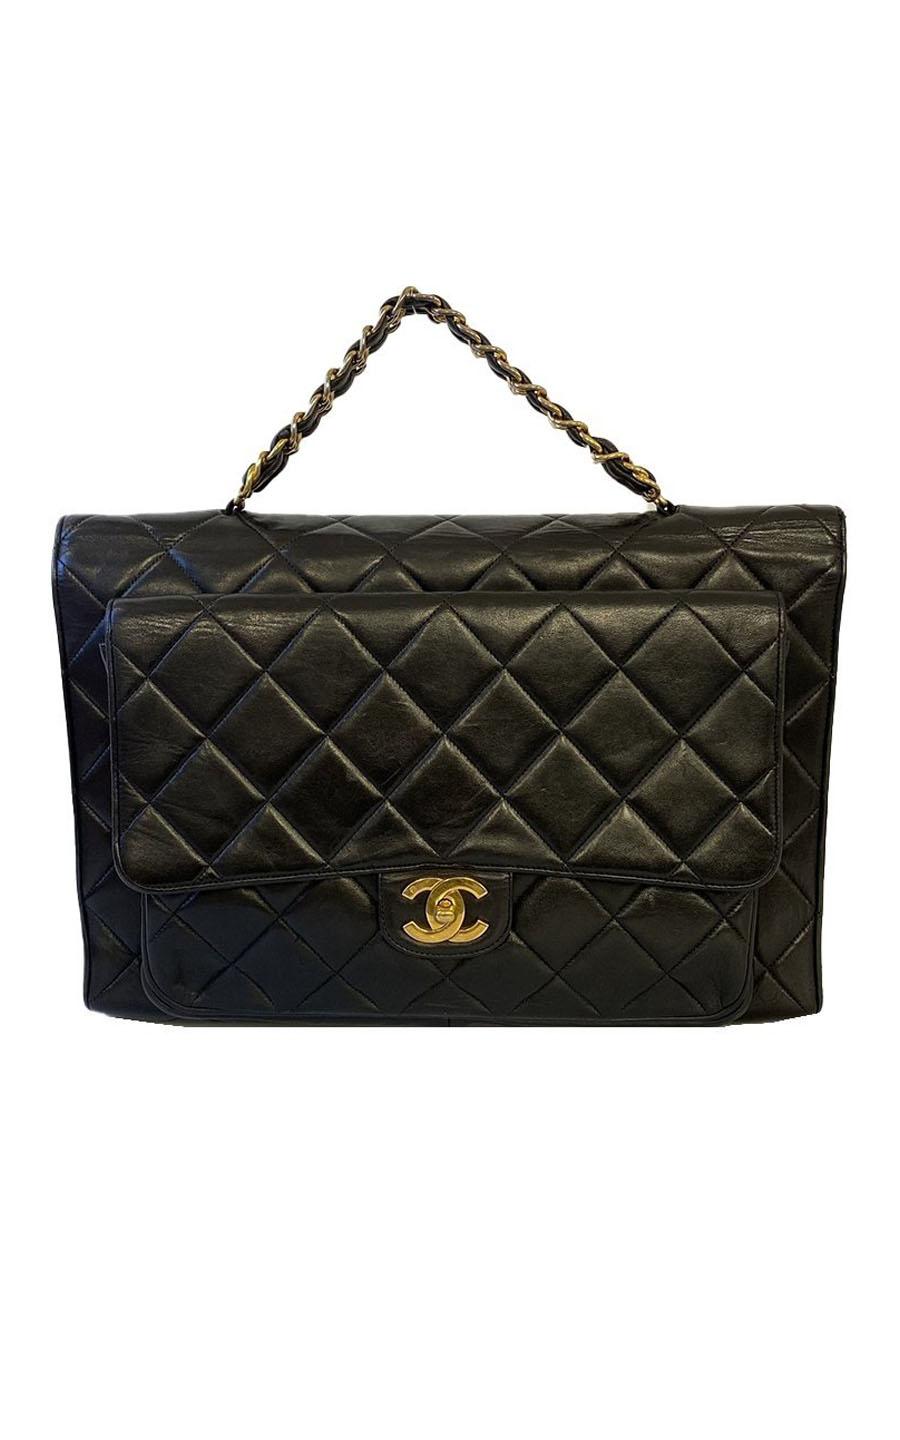 Chanel handbag with gold-colored hardware. The material of the bag is black Lambskin Leather. The bag opens with the interlocking CC lock. There are two compartments and two small pockets on the inside of the bag, one with a zipper and one slip in.